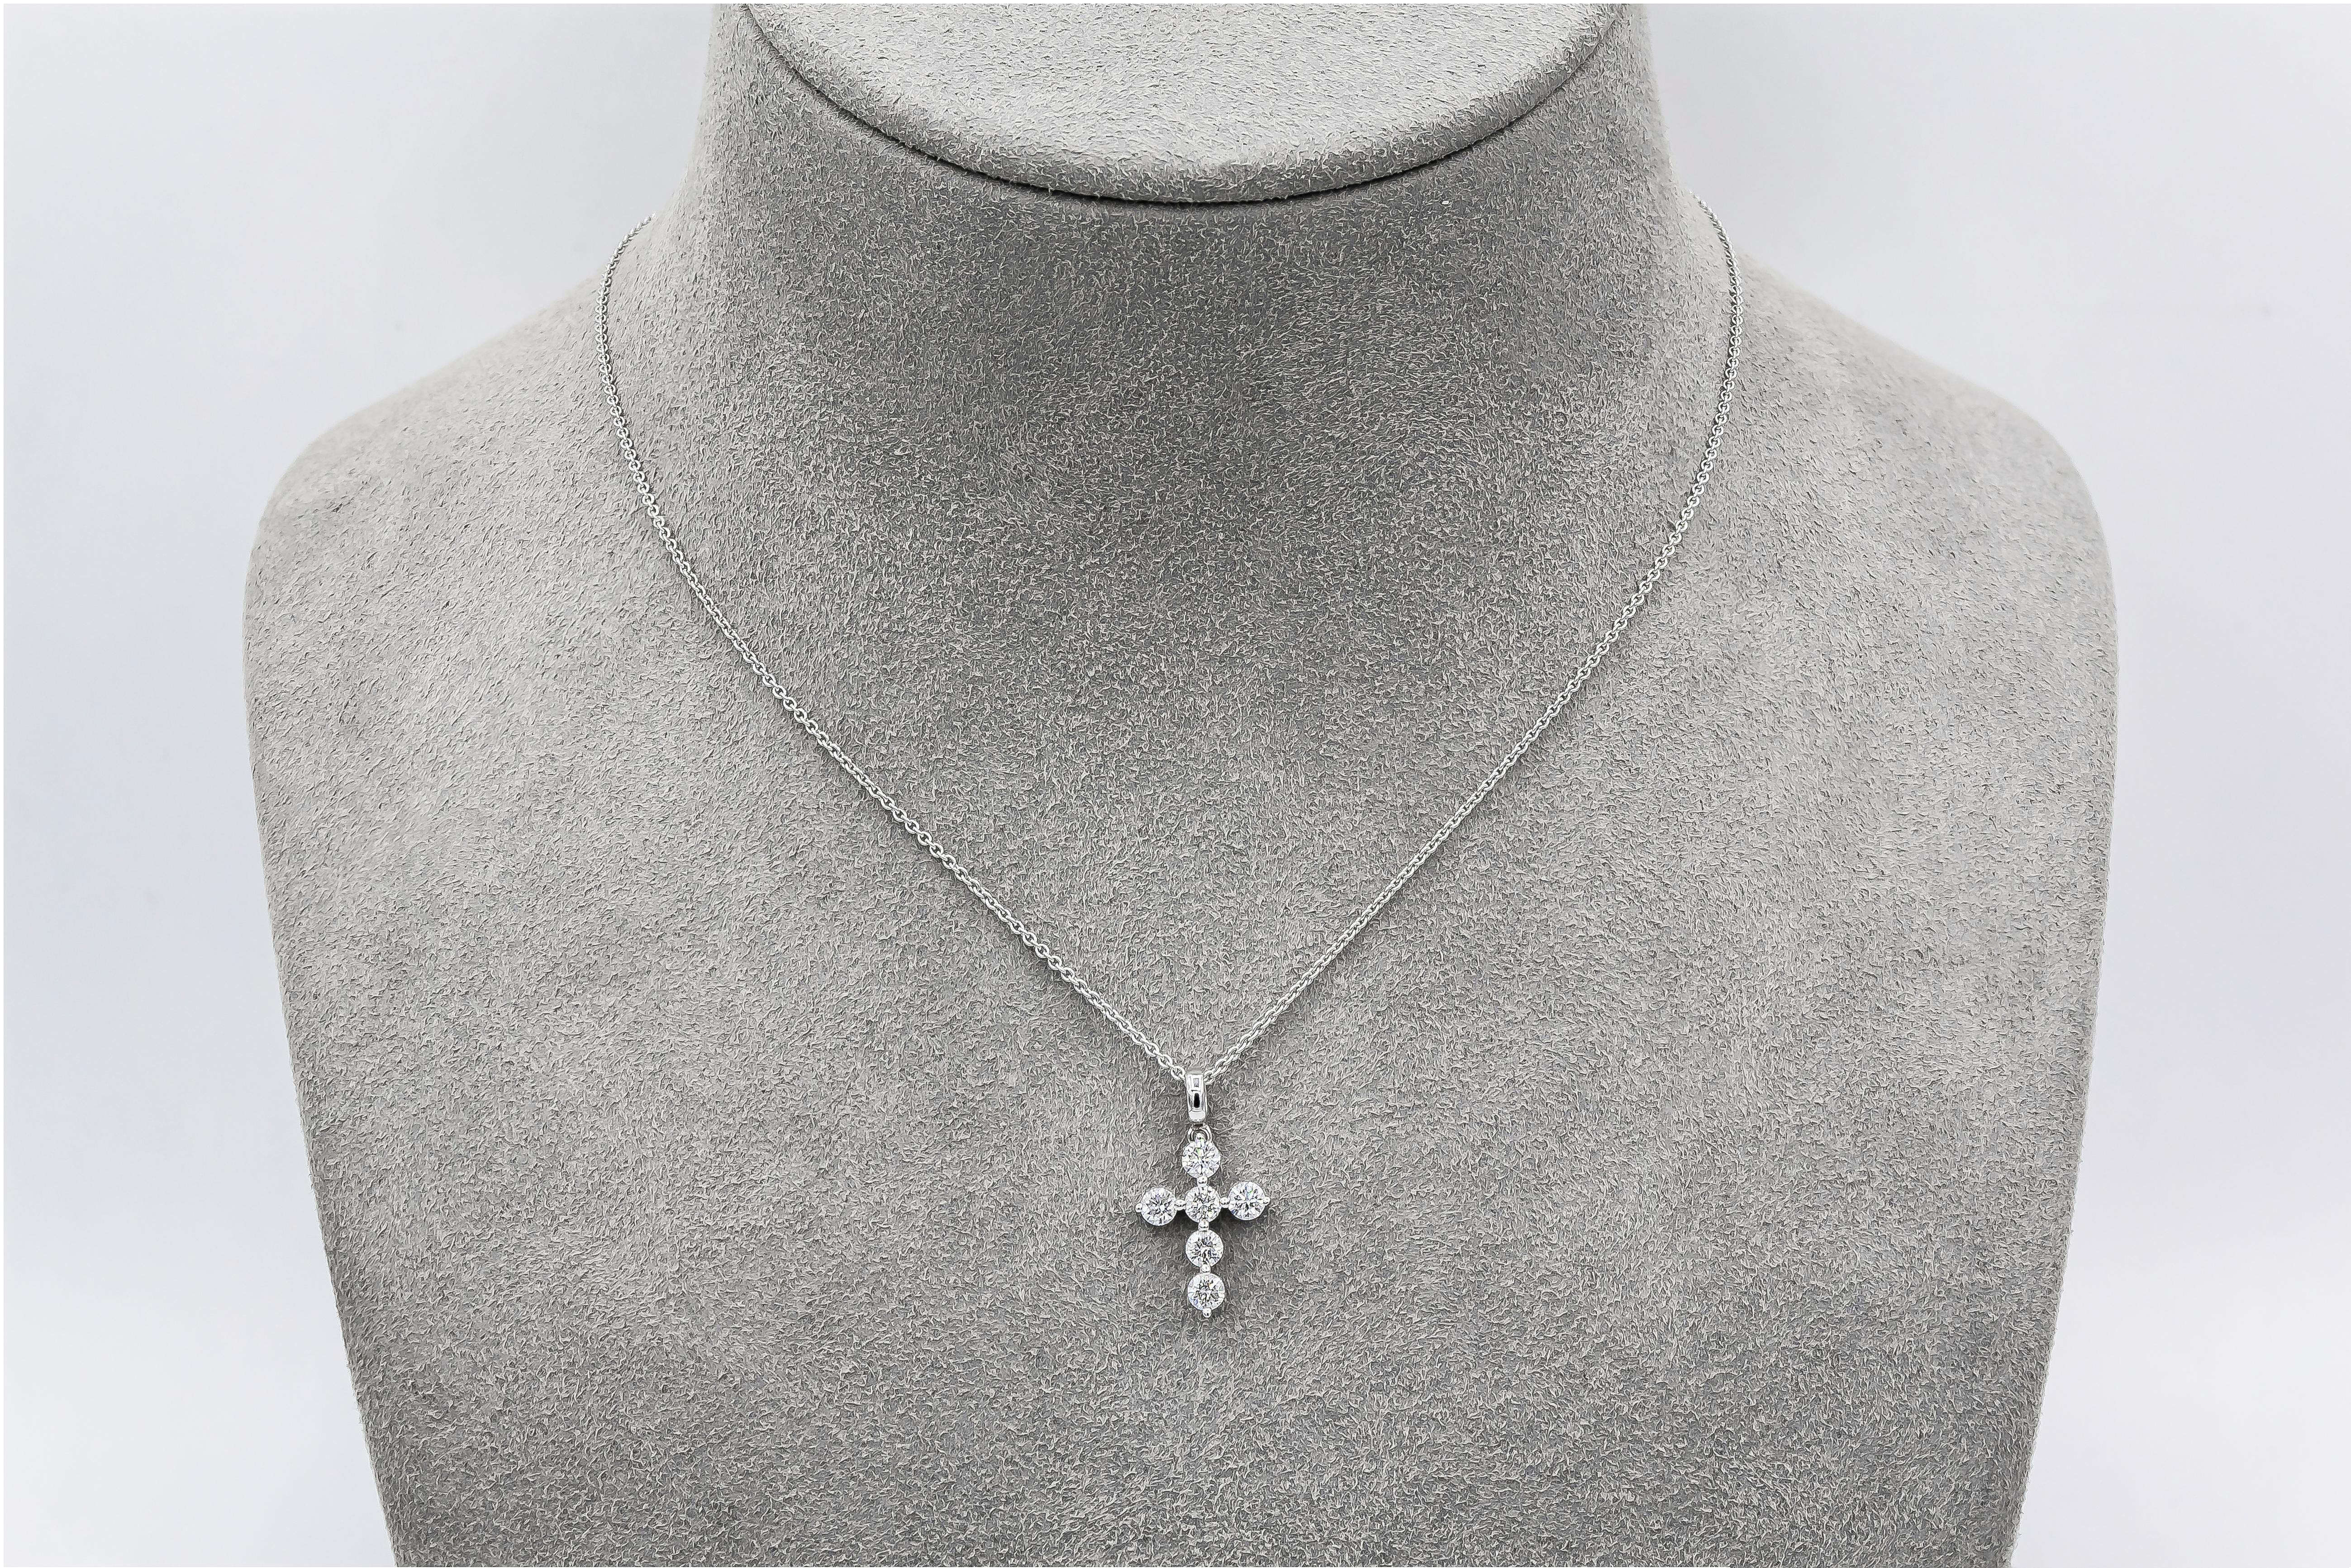 A classic religious pendant necklace showcasing six round brilliant diamonds, set in a cross made in 18 karat white gold. Diamonds weigh 0.64 carats total. 

Style available in different price ranges. Prices are based on your selection of the 4C’s